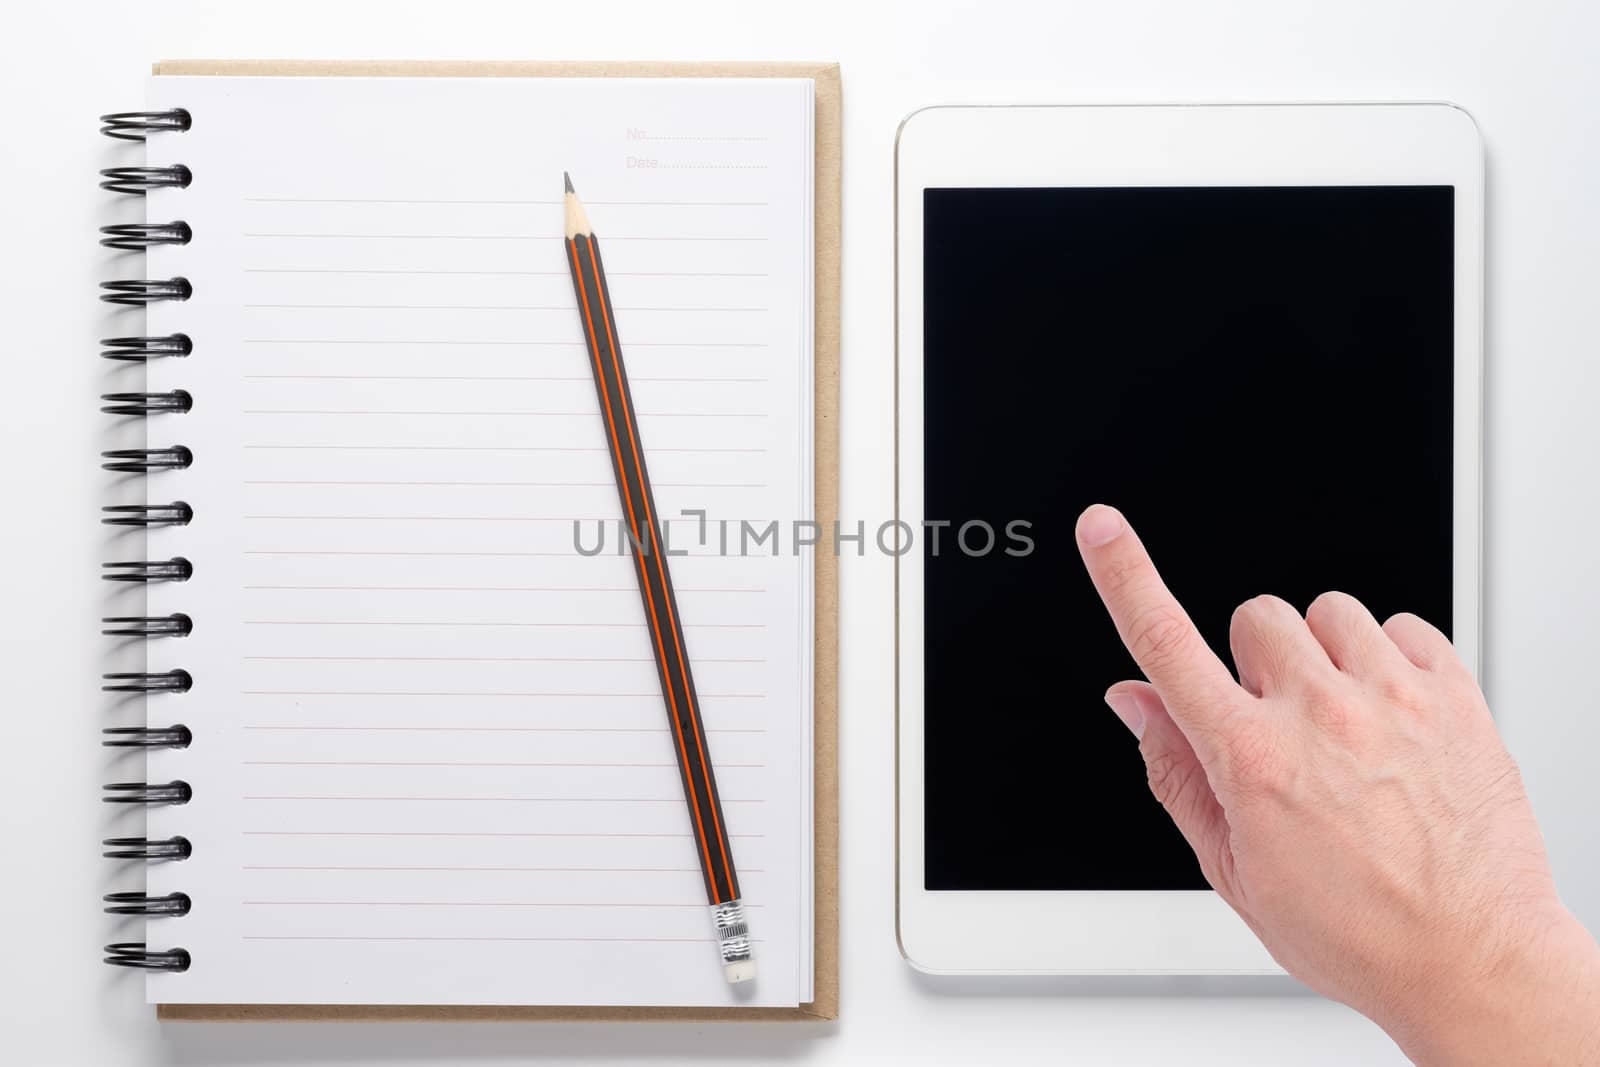 Notebook and tablet on white background with hand touch on tablet screen